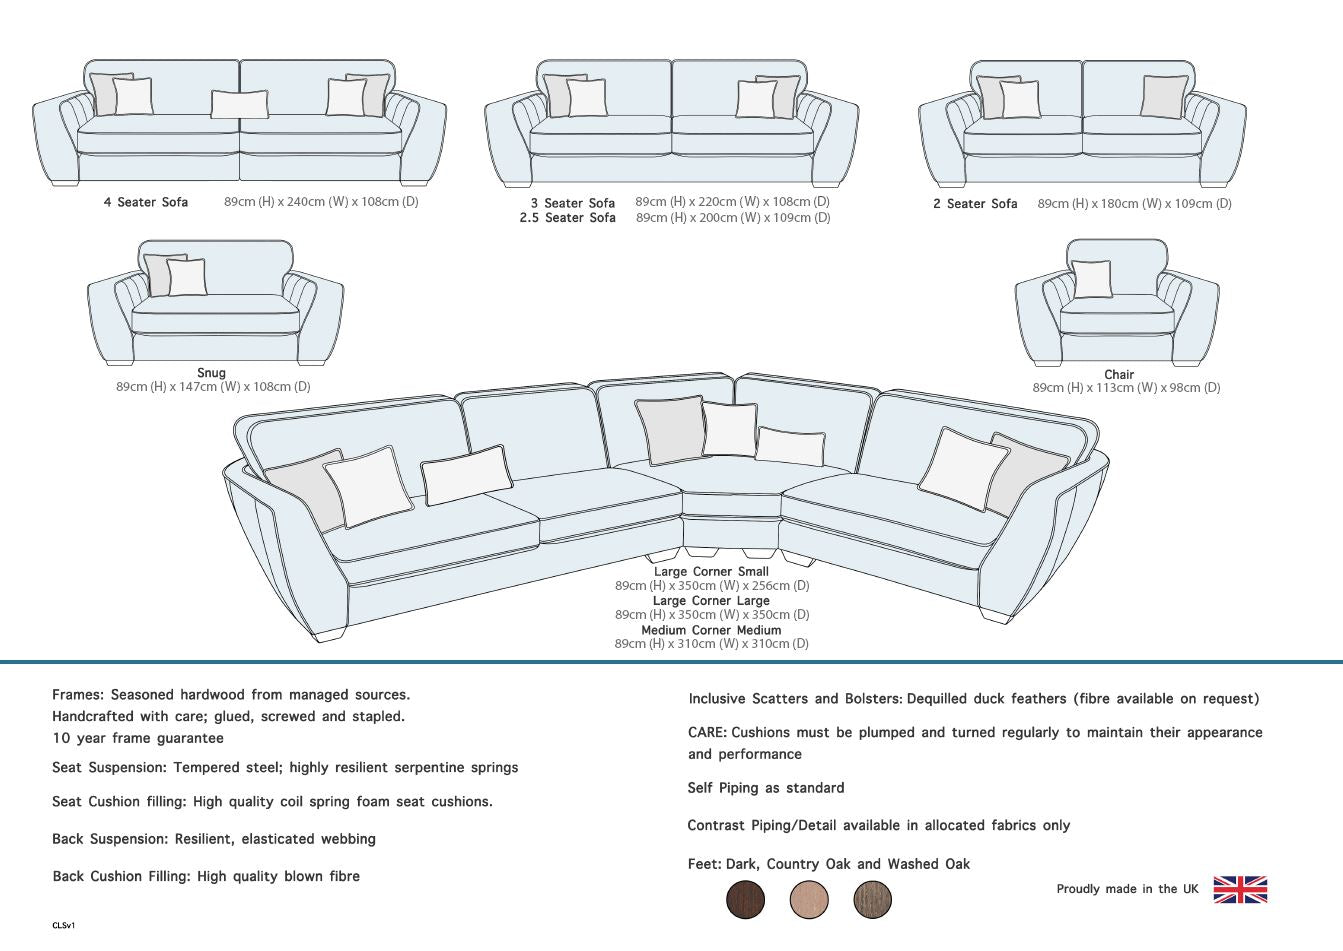 Carson Small Corner Large Sofa Group Contrast Piping